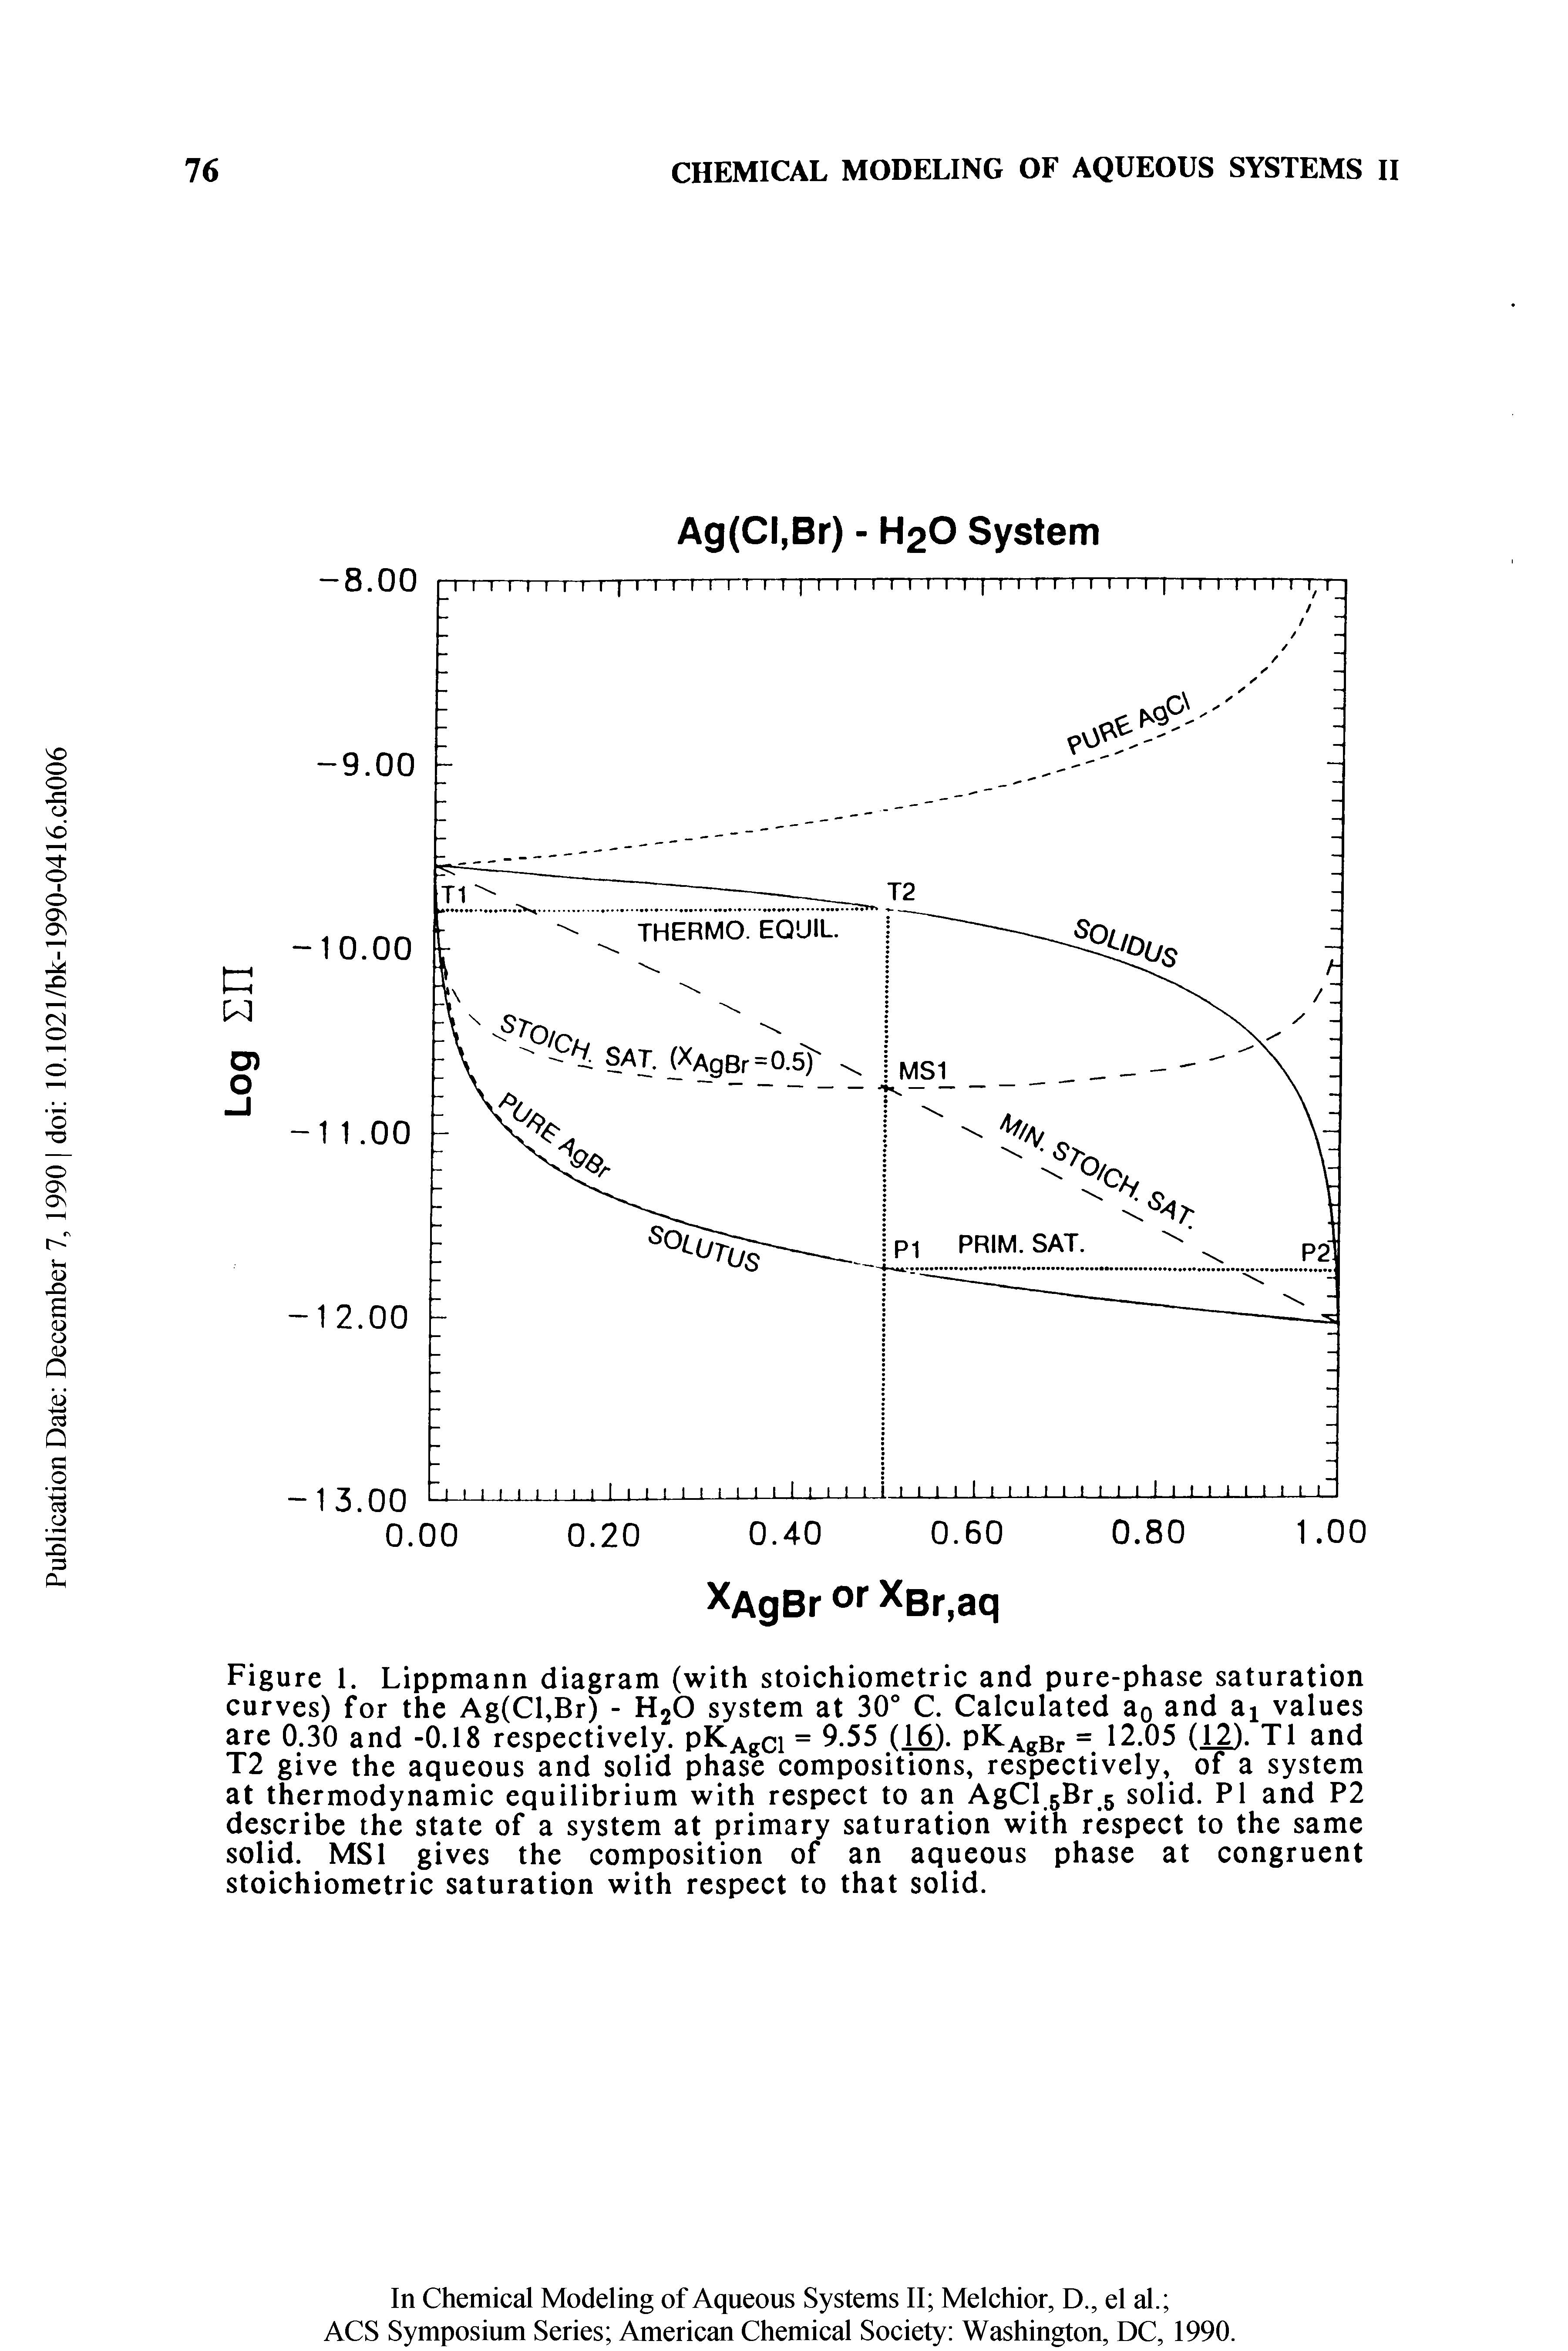 Figure 1. Lippmann diagram (with stoichiometric and pure-phase saturation curves) for the Ag(Cl,Br) - H2O system at 30° C. Calculated ao and ai values are 0.30 and -0.18 respectively. pK gci = 9.55 (16J. pK gBr = 12.05 (12). T1 and T2 give the aqueous and solid phase compositions, respectively, of a system at thermodynamic equilibrium with respect to an AgCl.sBr 5 solid. PI and P2 describe the state of a system at primary saturation with respect to the same solid. MSI gives the composition of an aqueous phase at congruent stoichiometric saturation with respect to that solid.